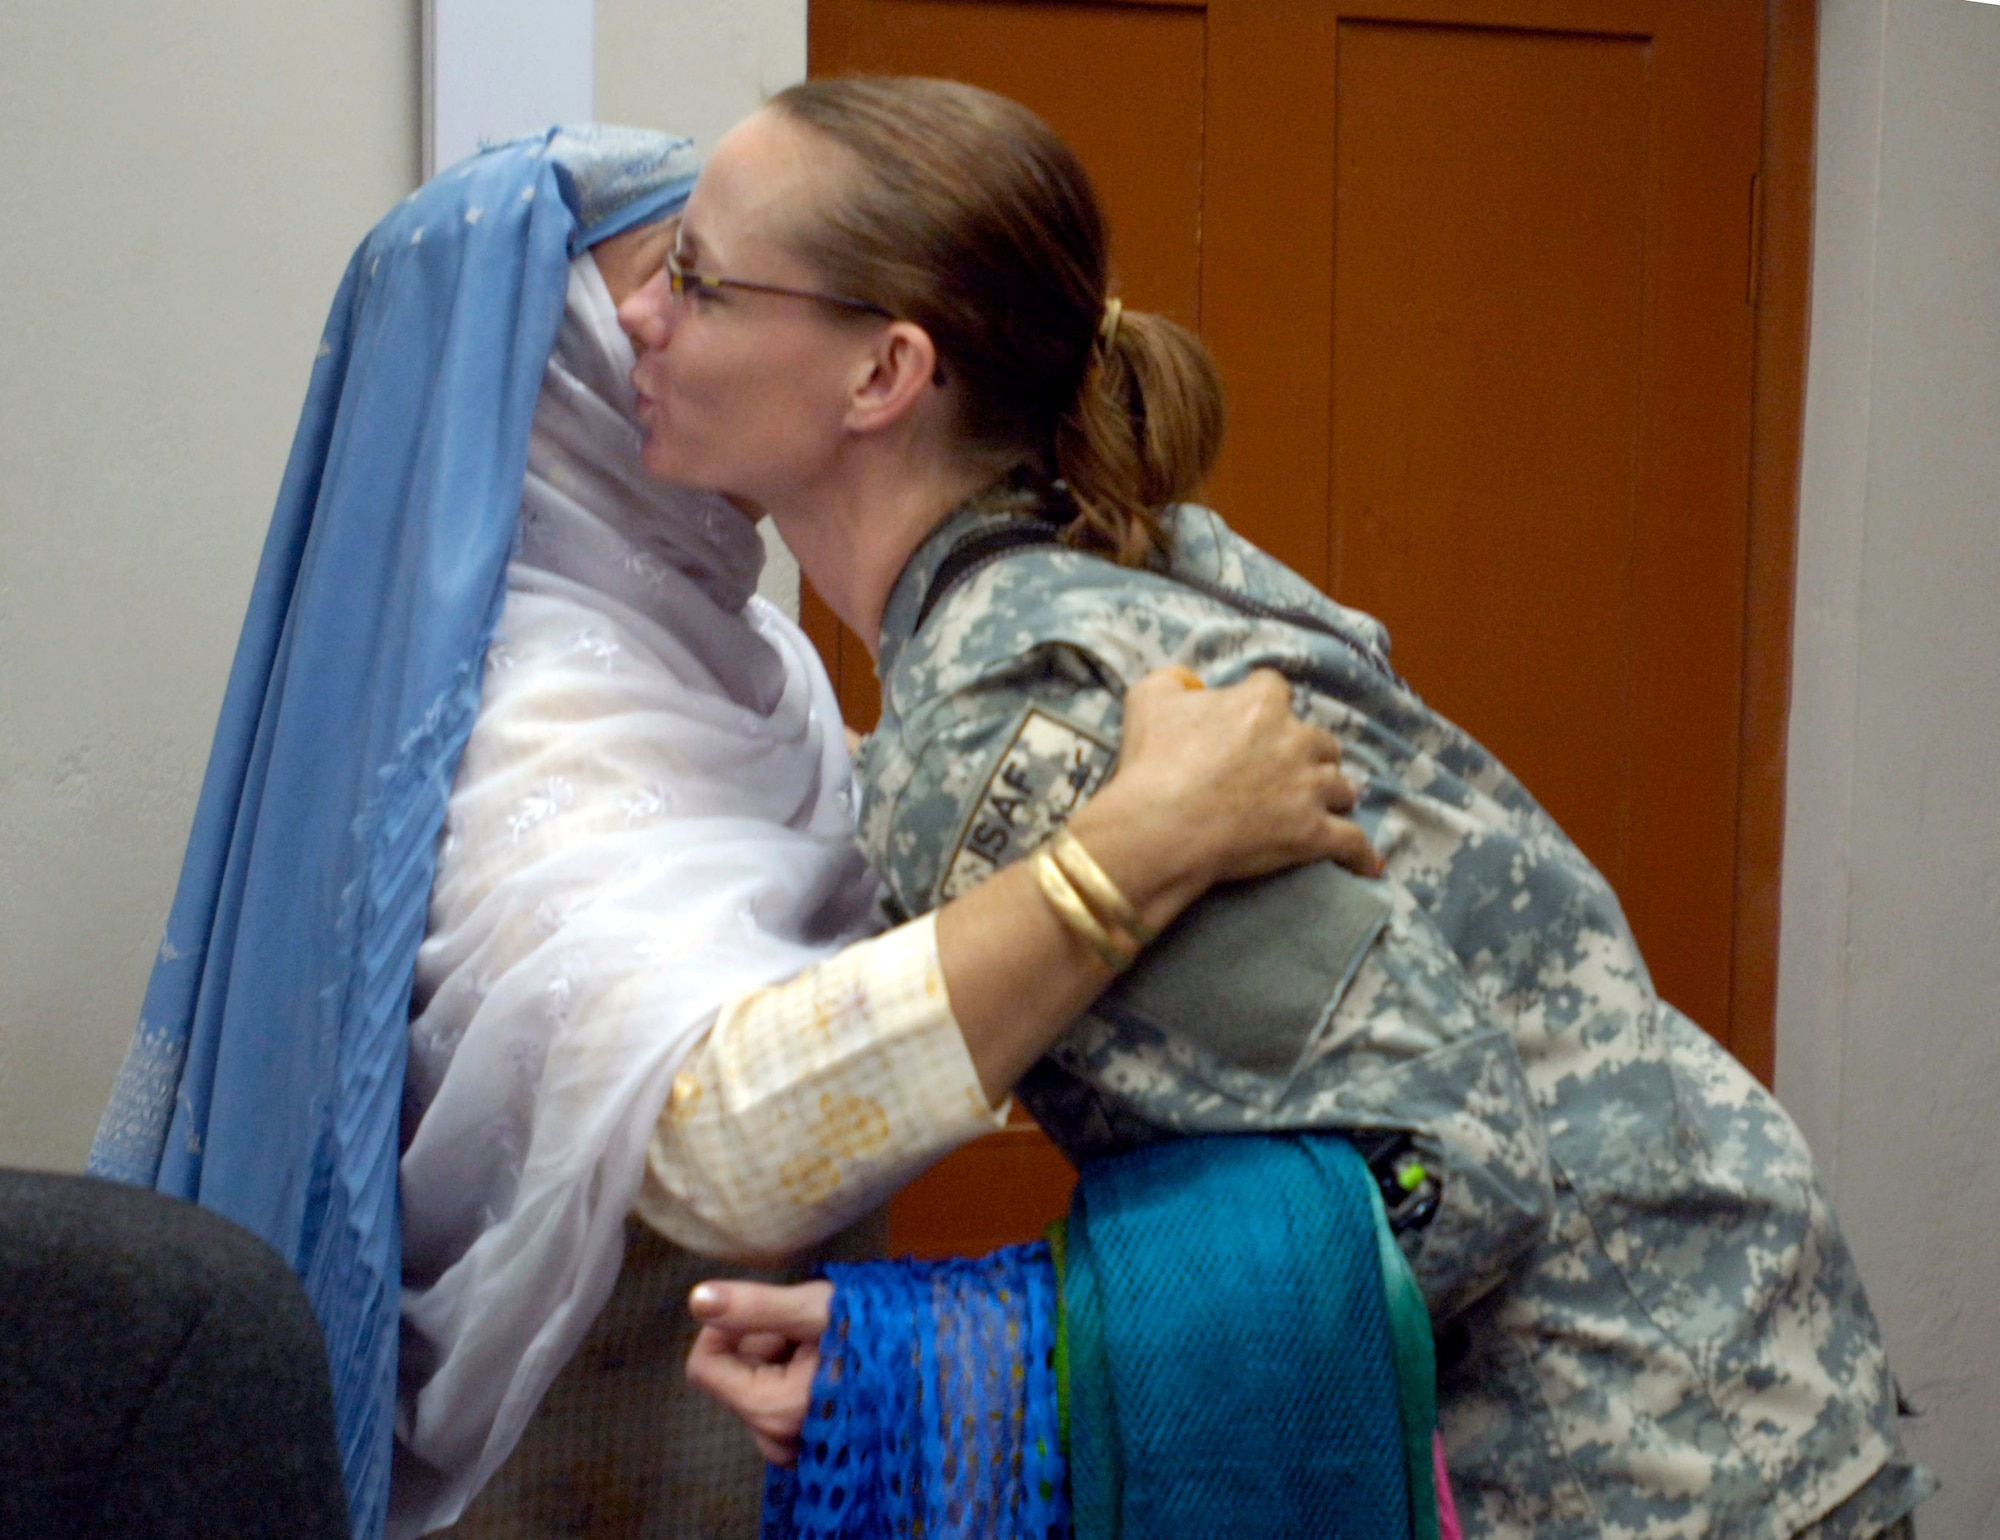 Capt. Heather Kekic shares a traditional greeting with an Afghan woman during an afternoon tea Sept. 5 at Forward Operating Base Mehtar Lam, Afghanistan. Female Airmen and Soldiers assigned to the Laghman Provincial Reconstruction Team hosted the tea for influential Afghan women living throughout Afghanistan's Laghman province. The tea provides an opportunity for PRT members to educate the local women on humanitarian and security programs in place for them and their communities. Captain Kekic, the PRT's public affairs and information officer, is deployed from Randolph Air Force Base, Texas. (U.S. Air Force photo/Staff Sgt. Julie Weckerlein)